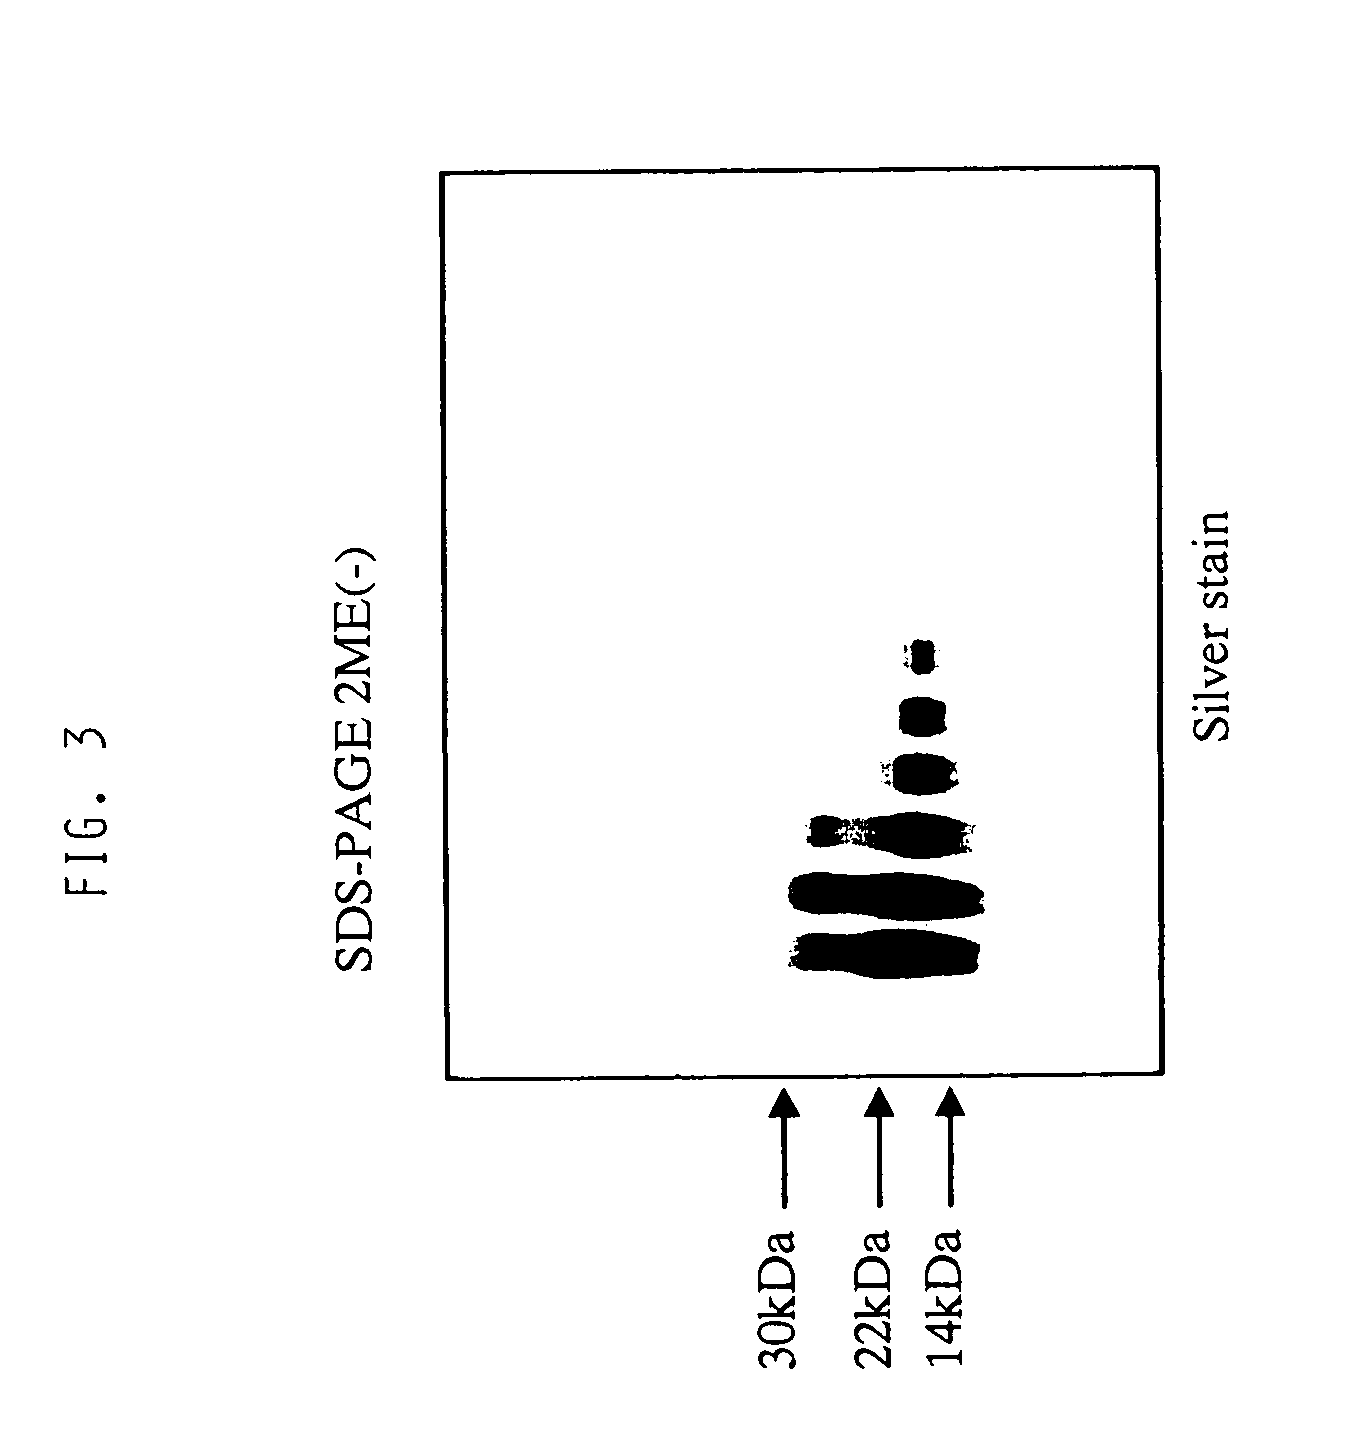 Peptide fragments having cell death inhibitory activity